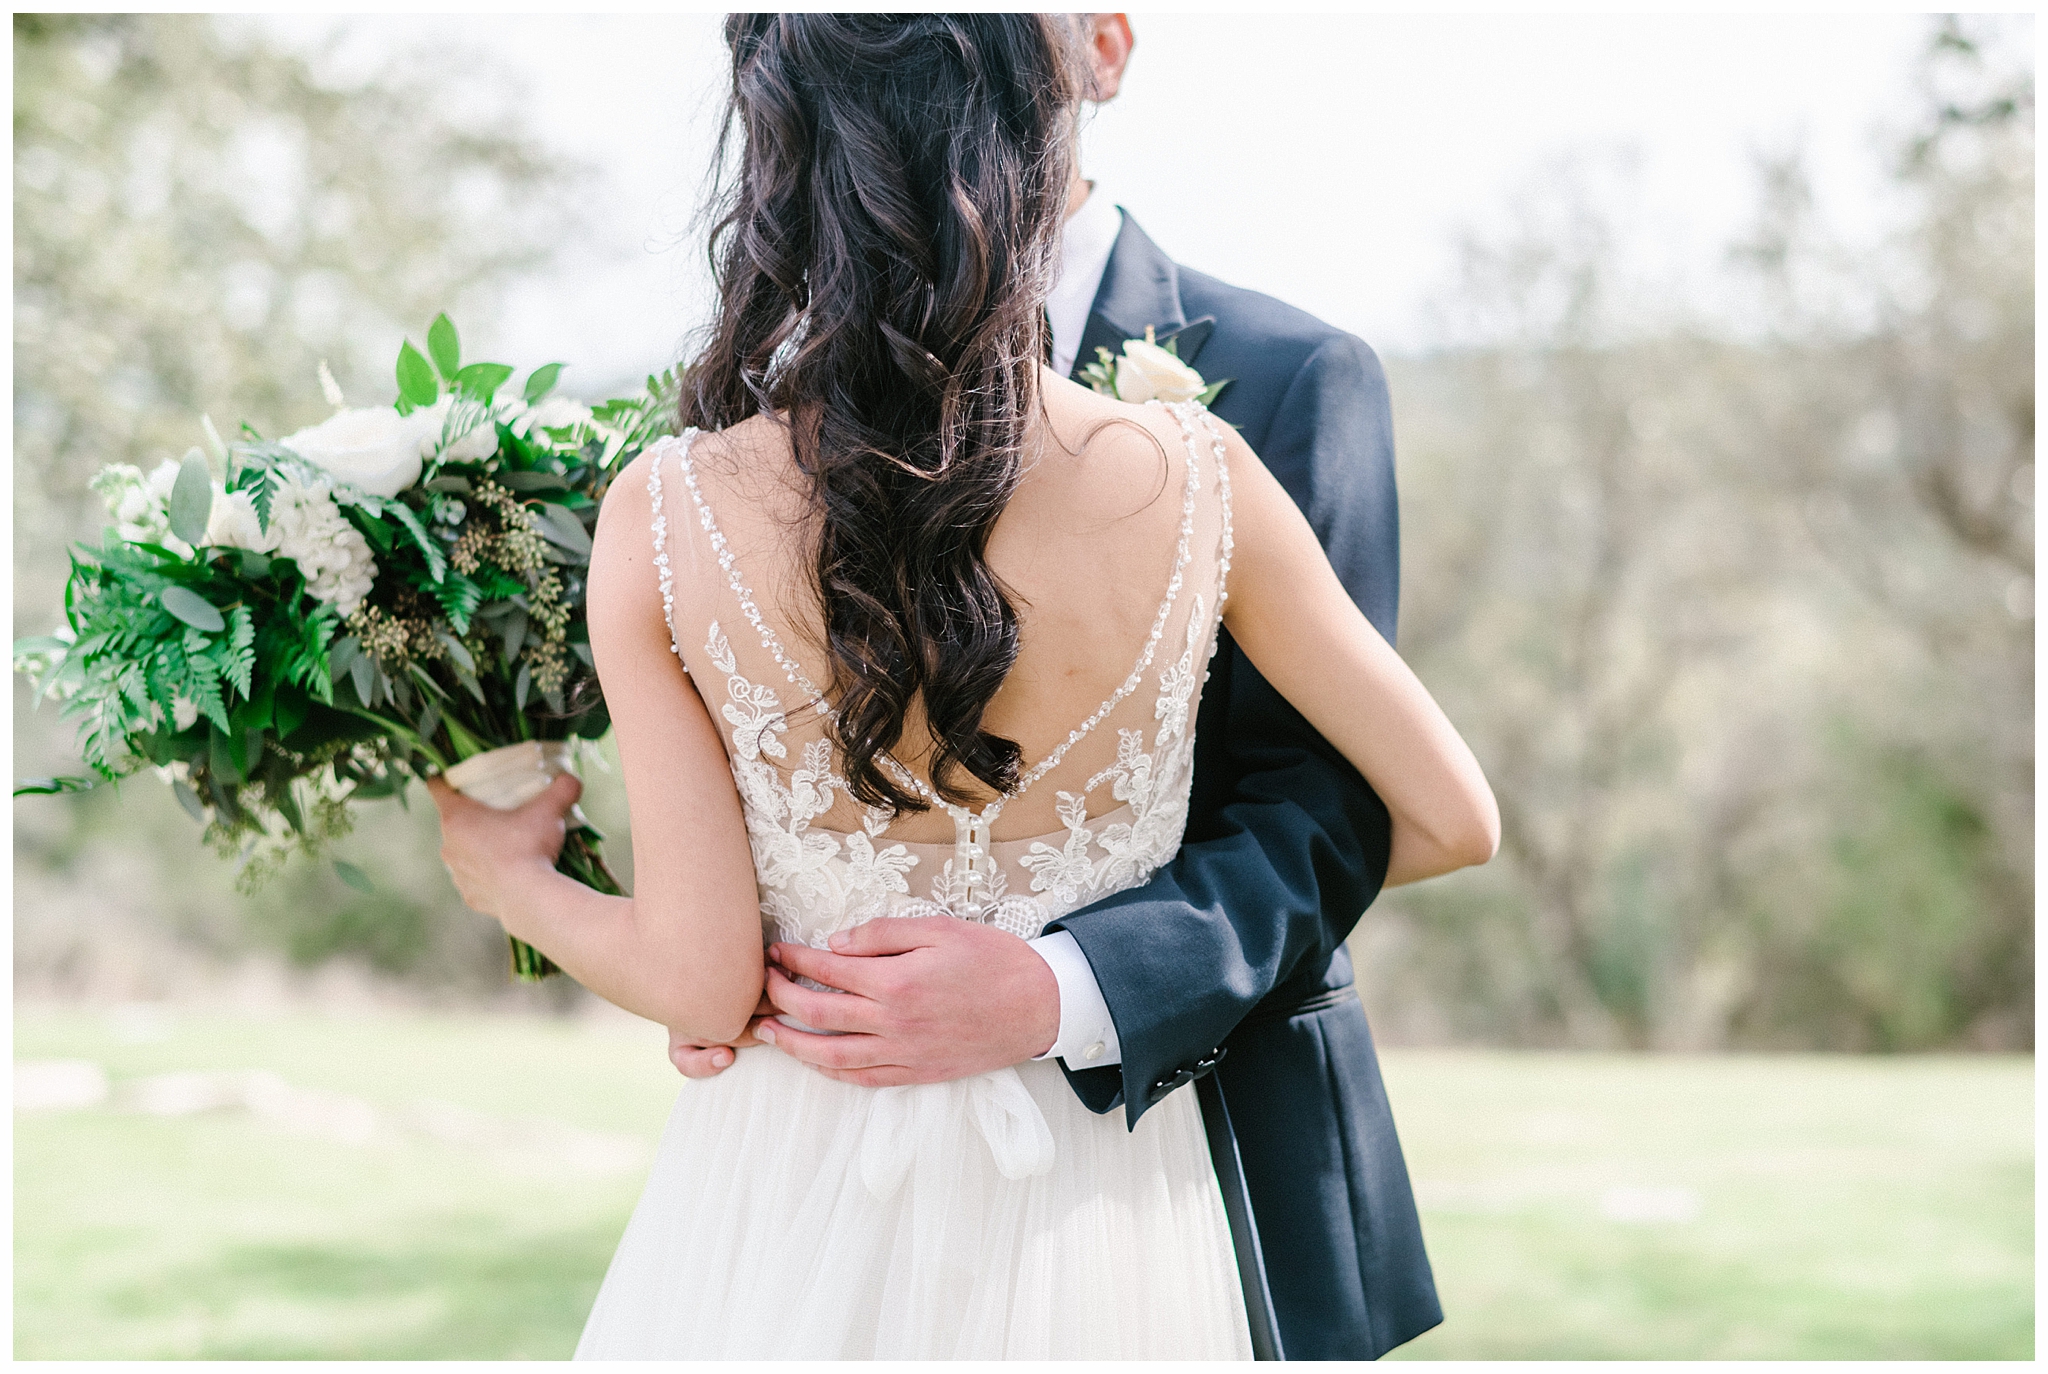 Bride and Groom First Look in Picturesque Texas Hill Country